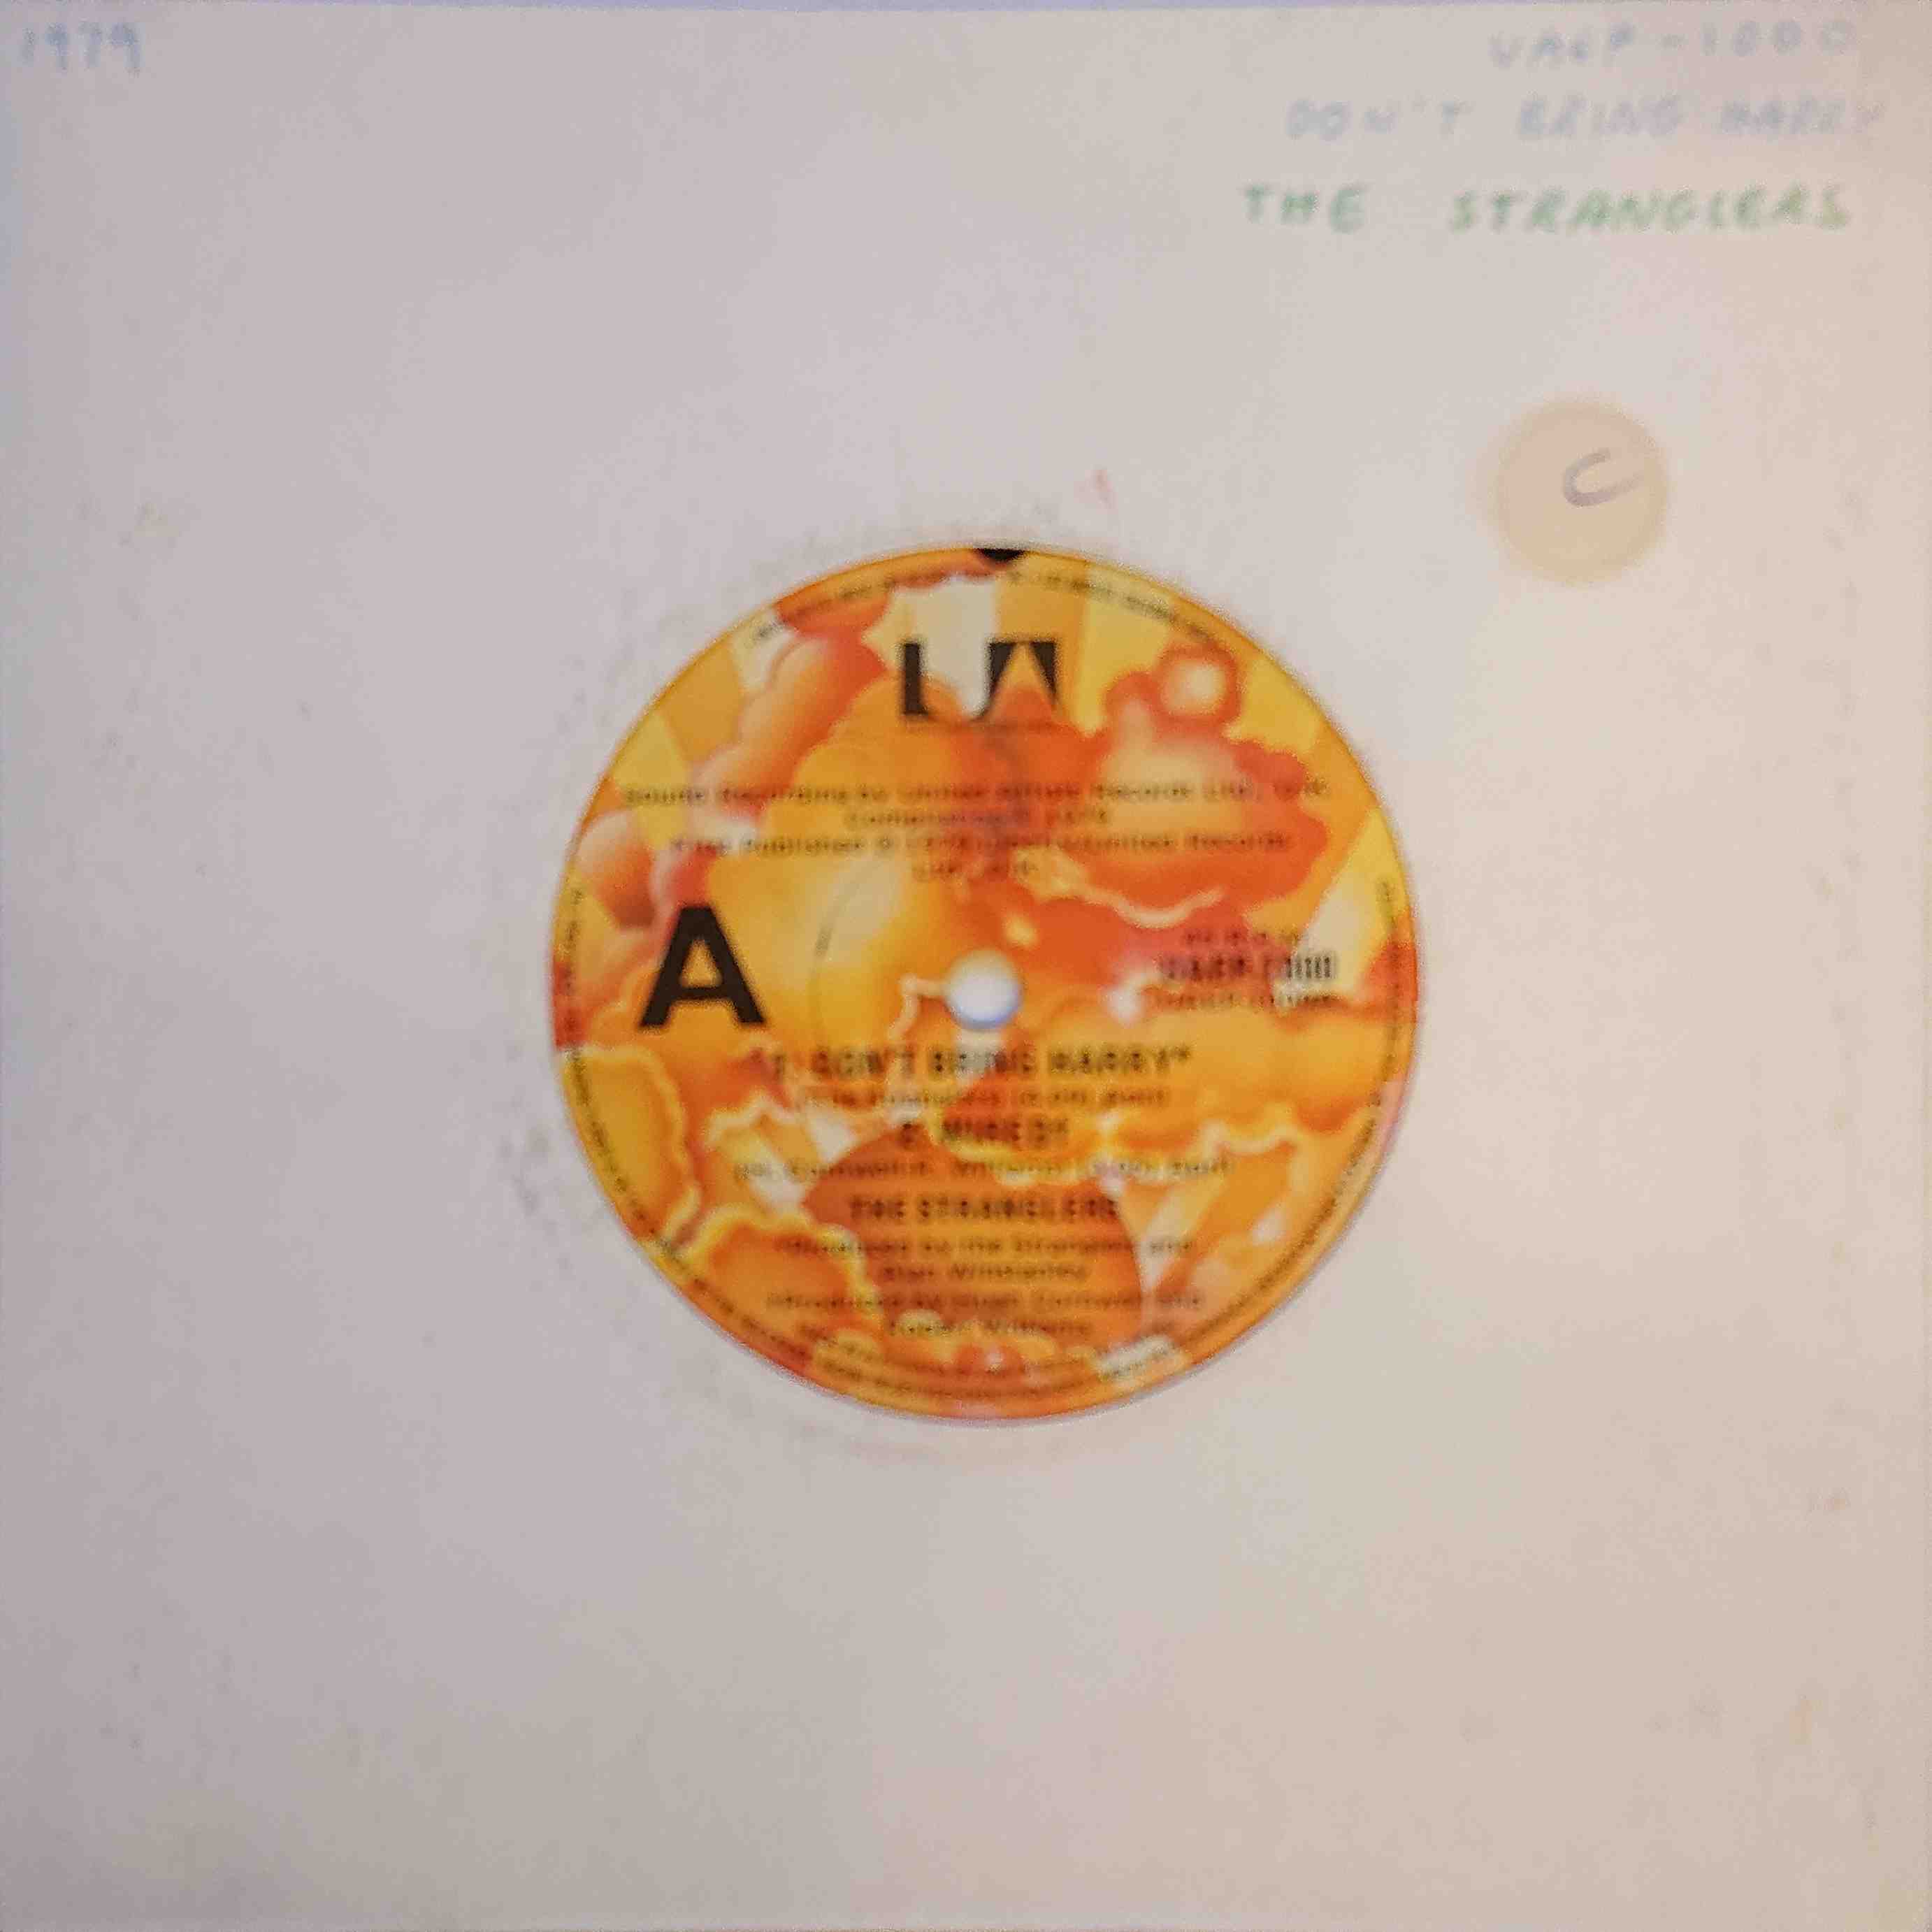 Picture of Don't bring Harry by artist The Stranglers from The Stranglers singles